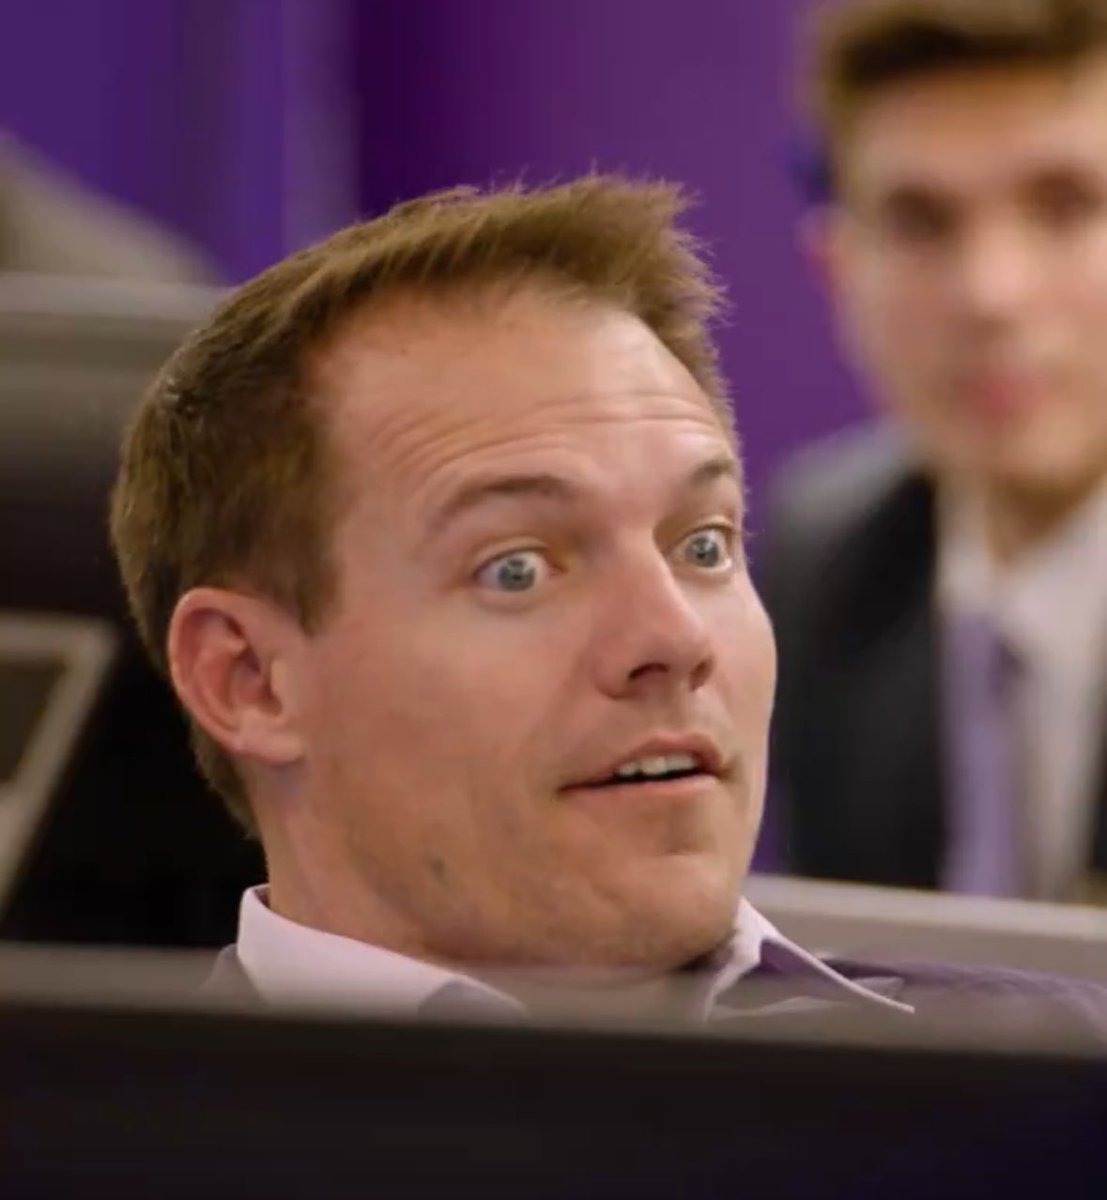 Me when I realized how drunk @lupagus was during our post draft grade video last night. #SKOL